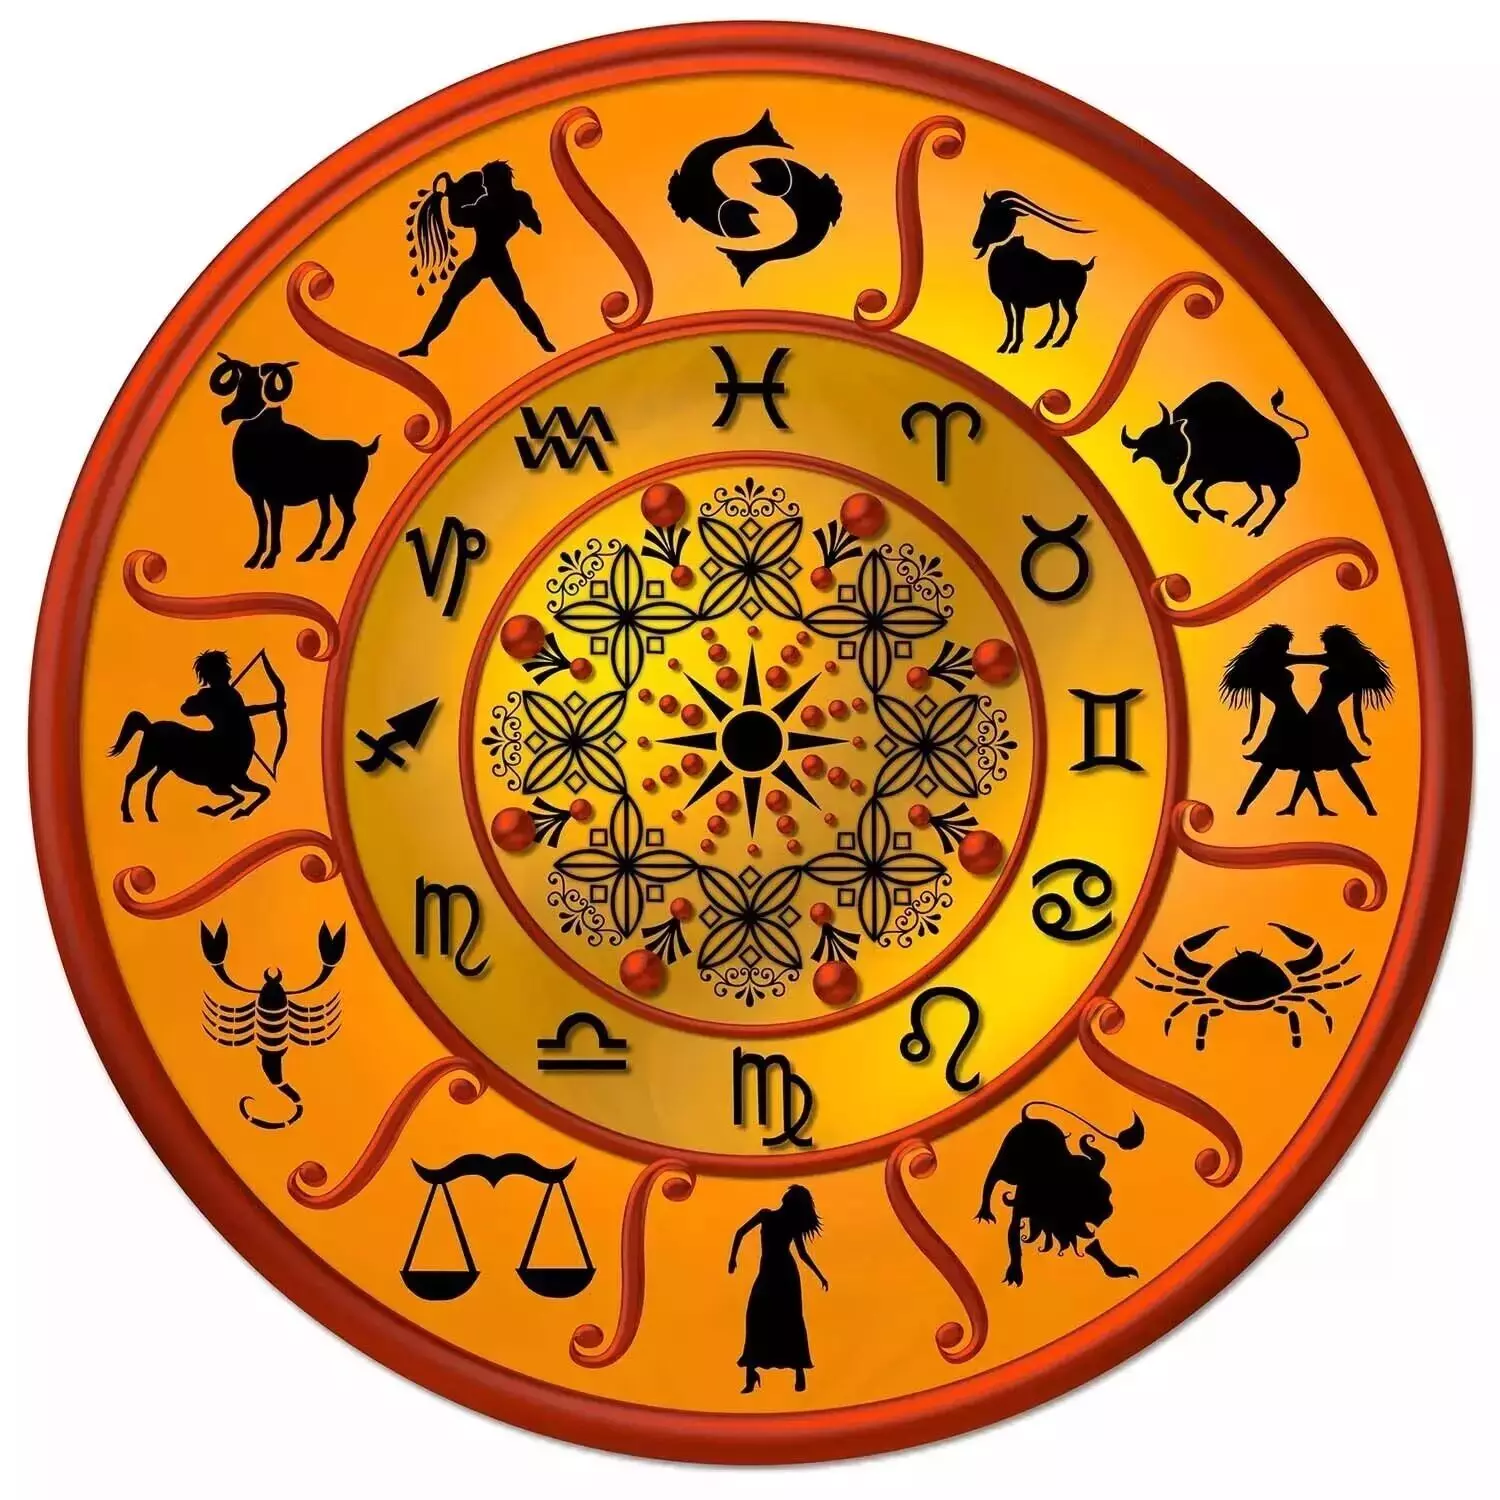 11 February – Know your todays horoscope